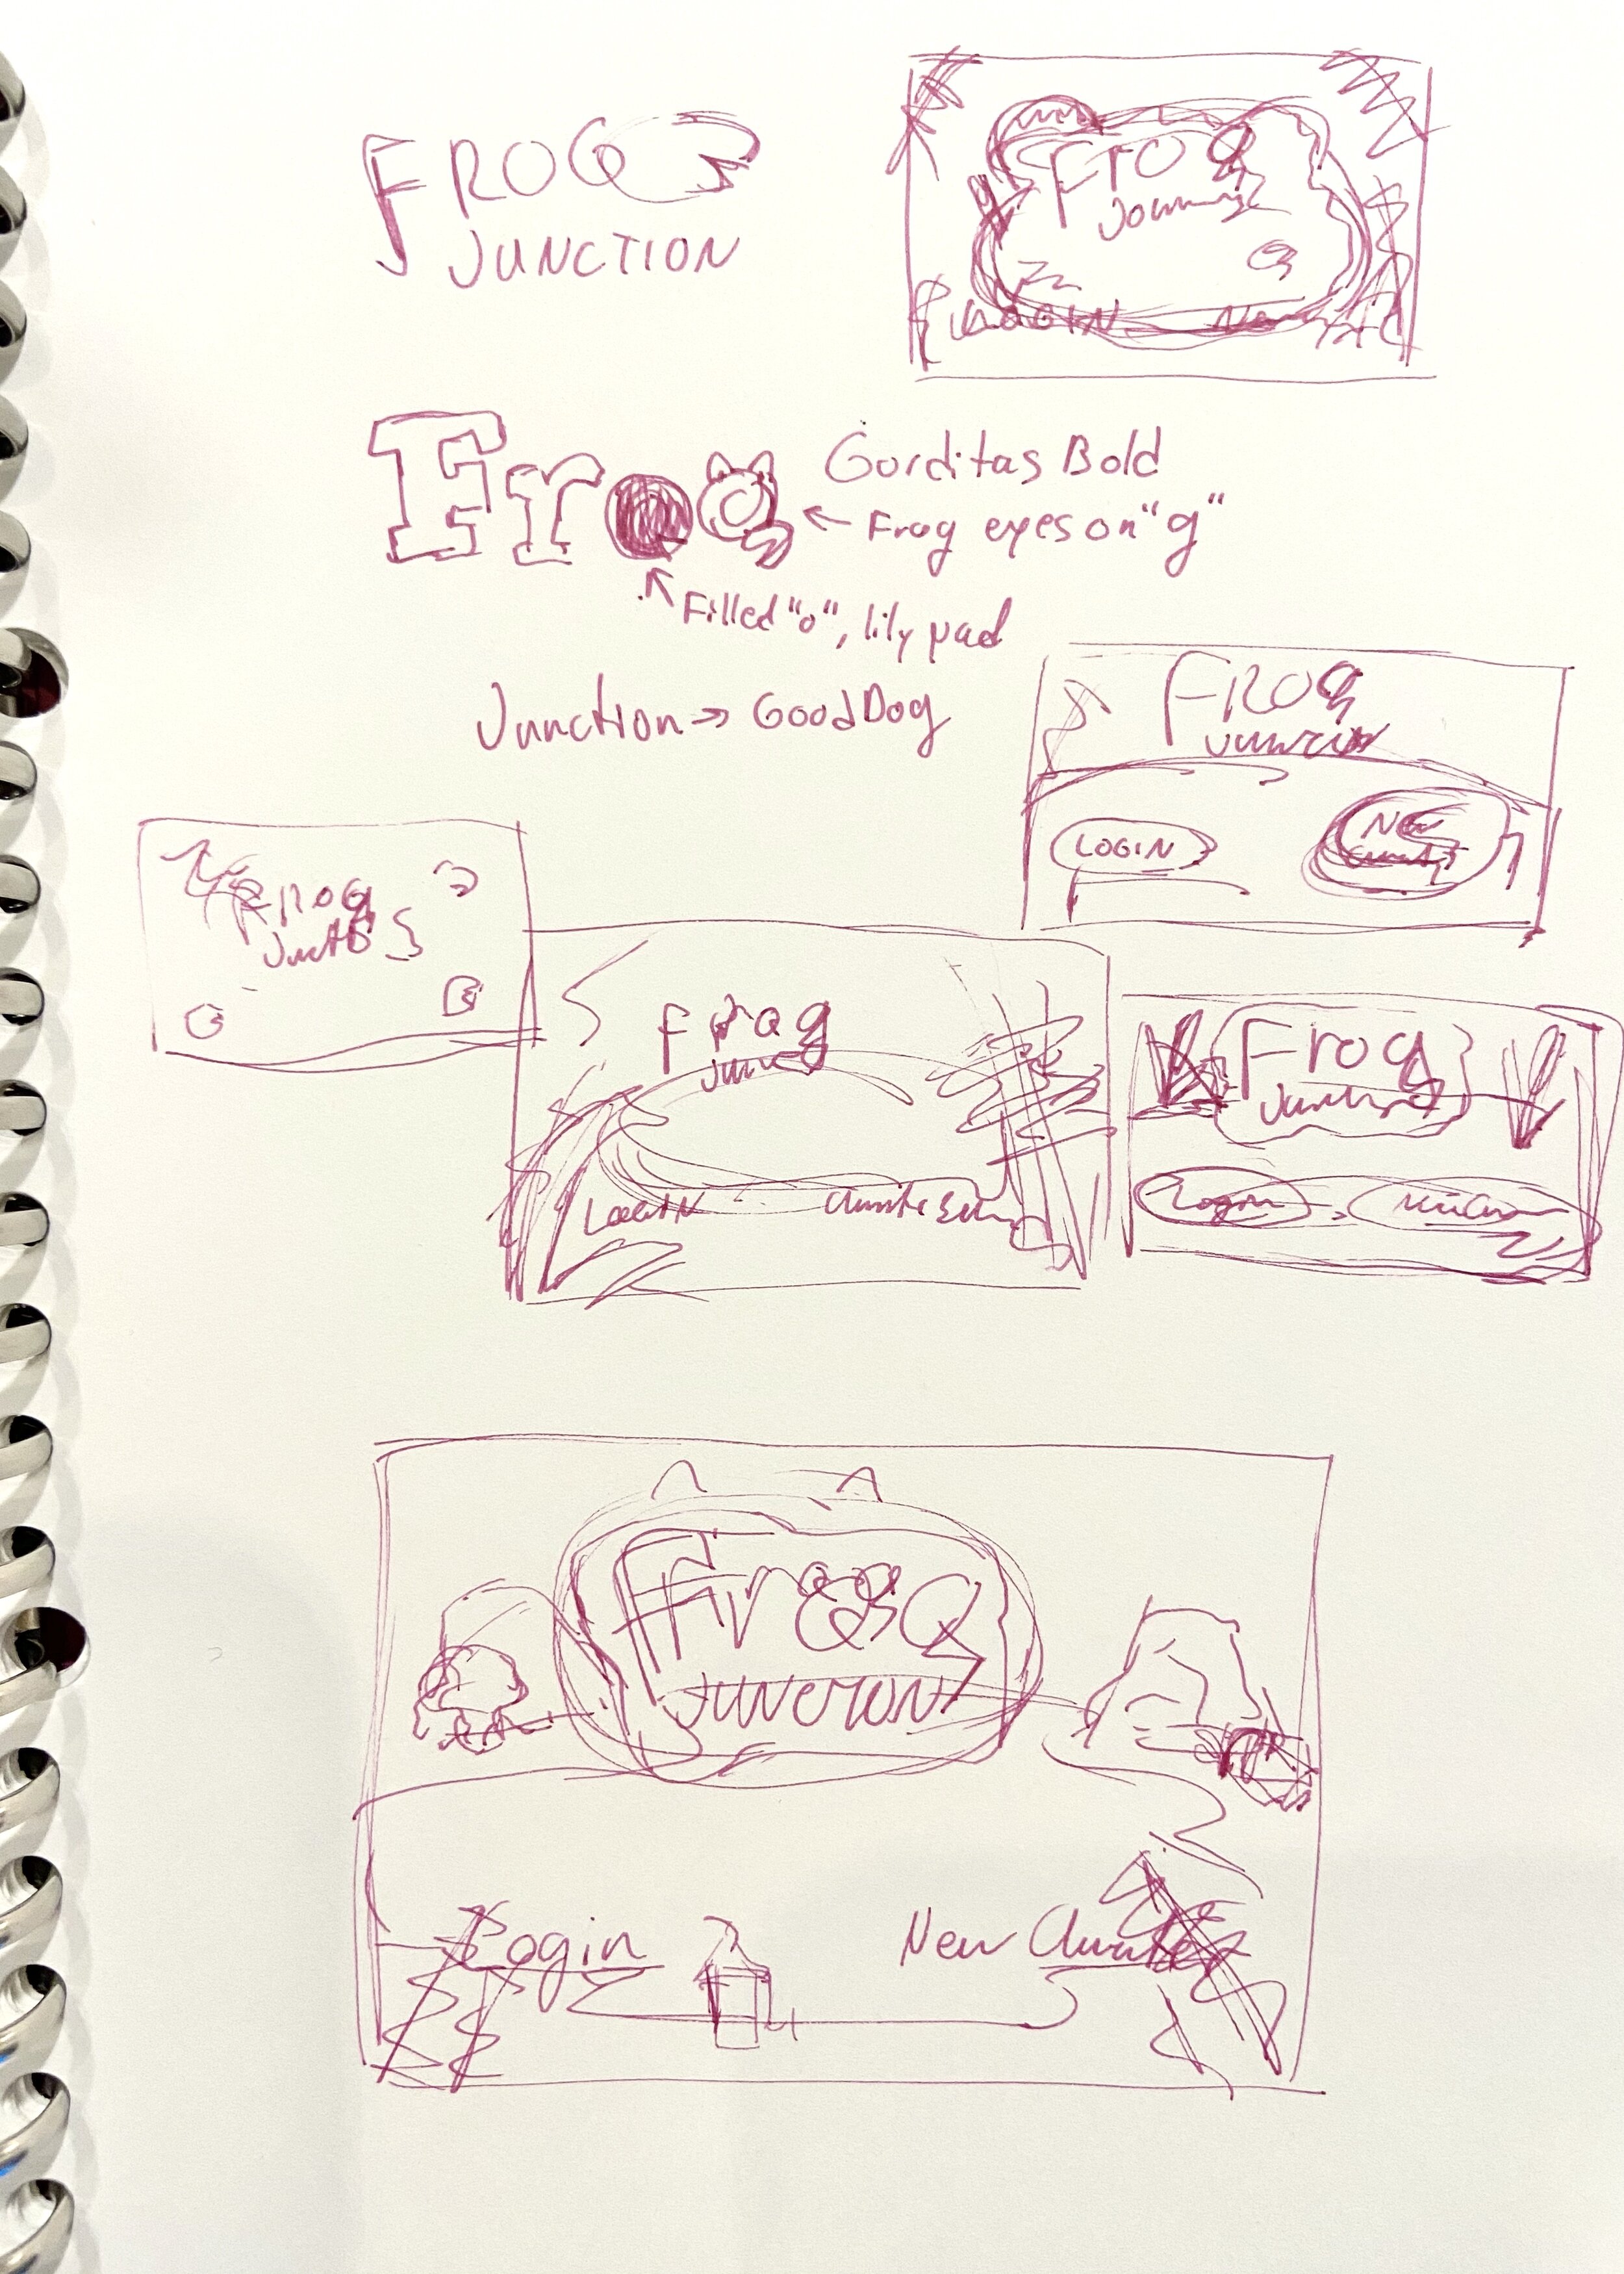  Rough title screen sketches, mostly centered around the background illustration. 